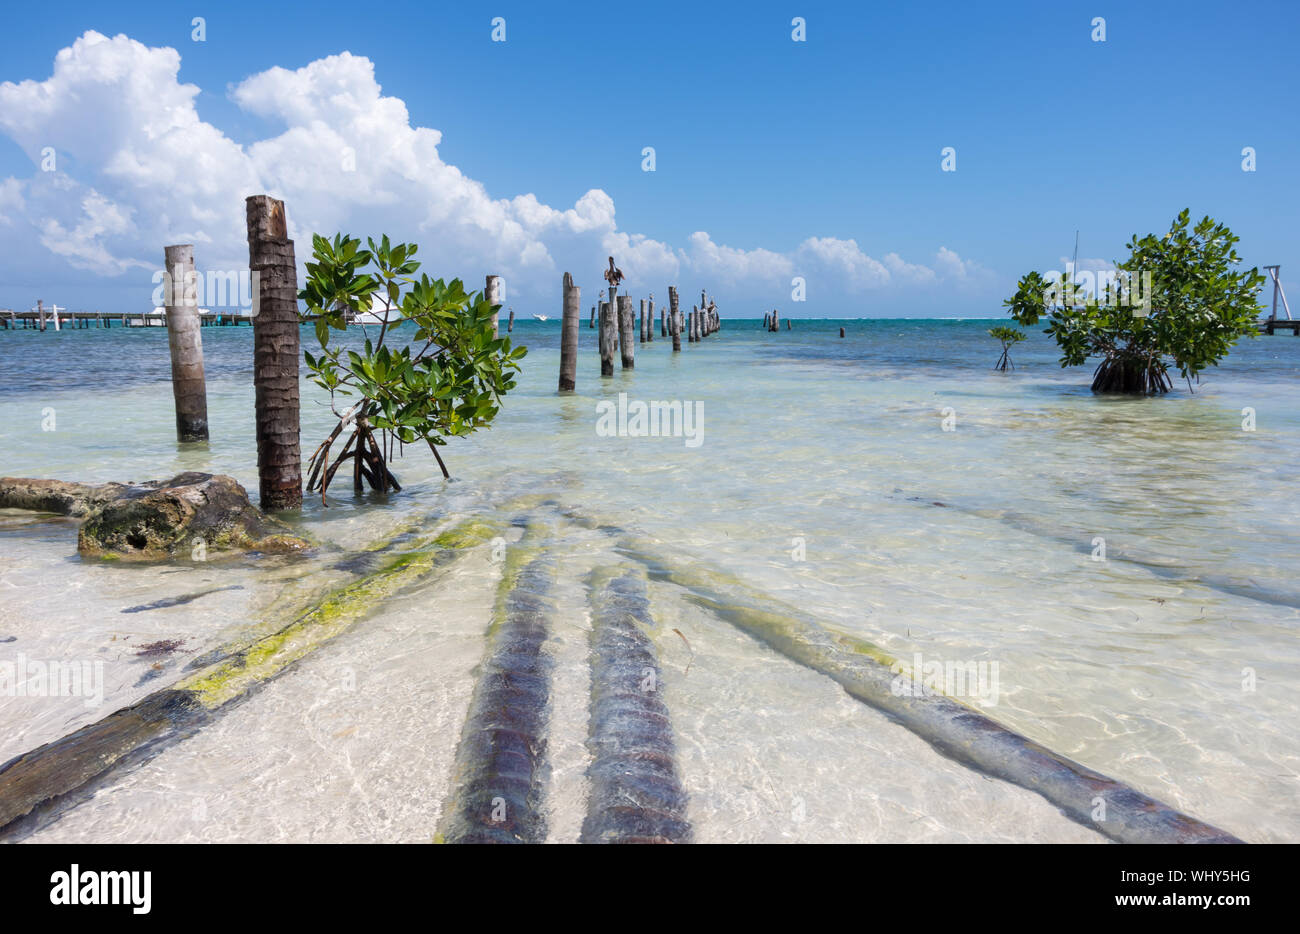 Caribbean shore of Caye Caulker island with abandoned old pier, pelicans and small mangrove trees. Belize, Central America. Stock Photo